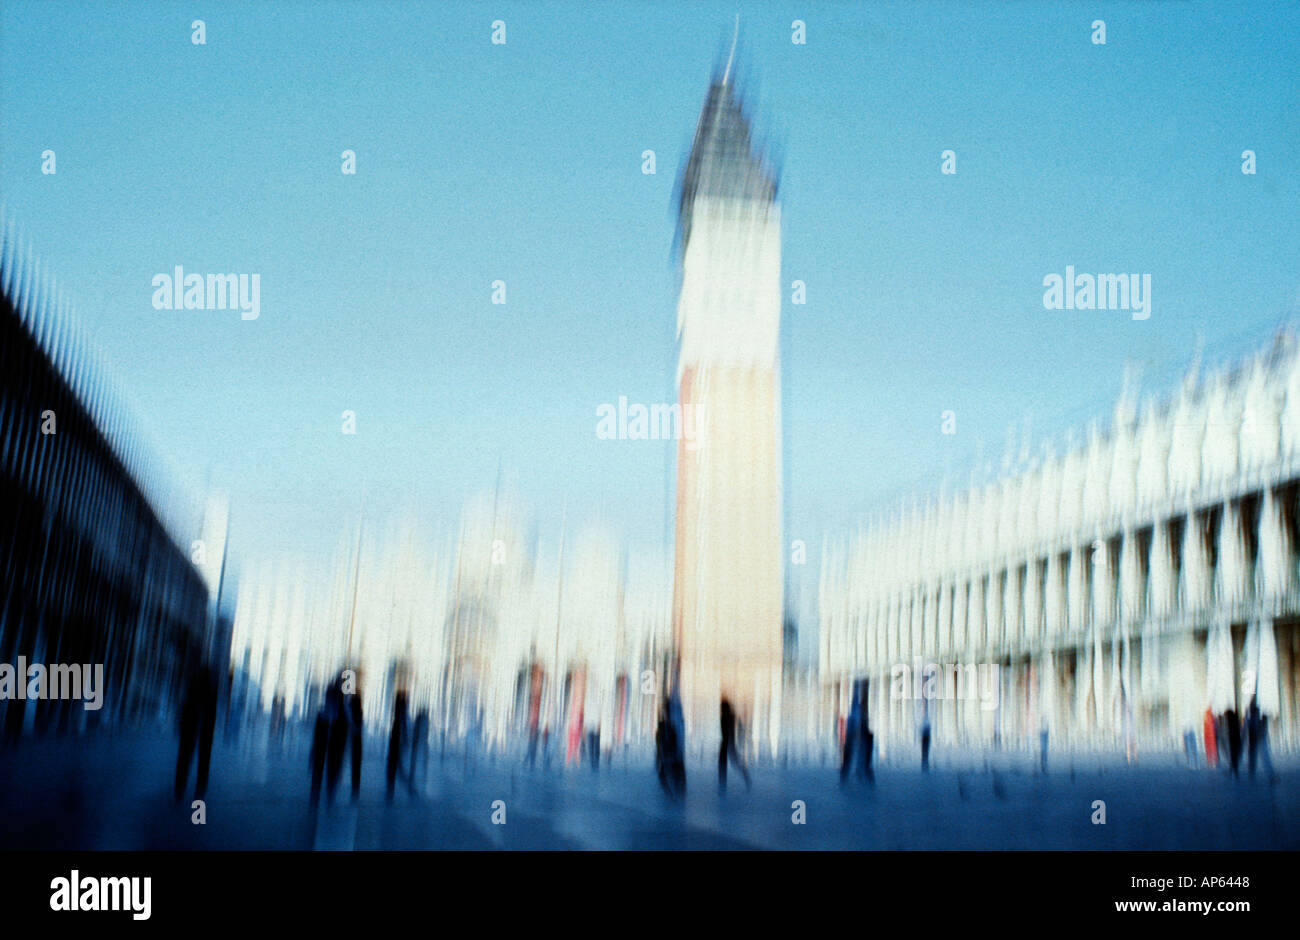 moody Venice Piazza San Marco impressionistic effect from camera movement Stock Photo